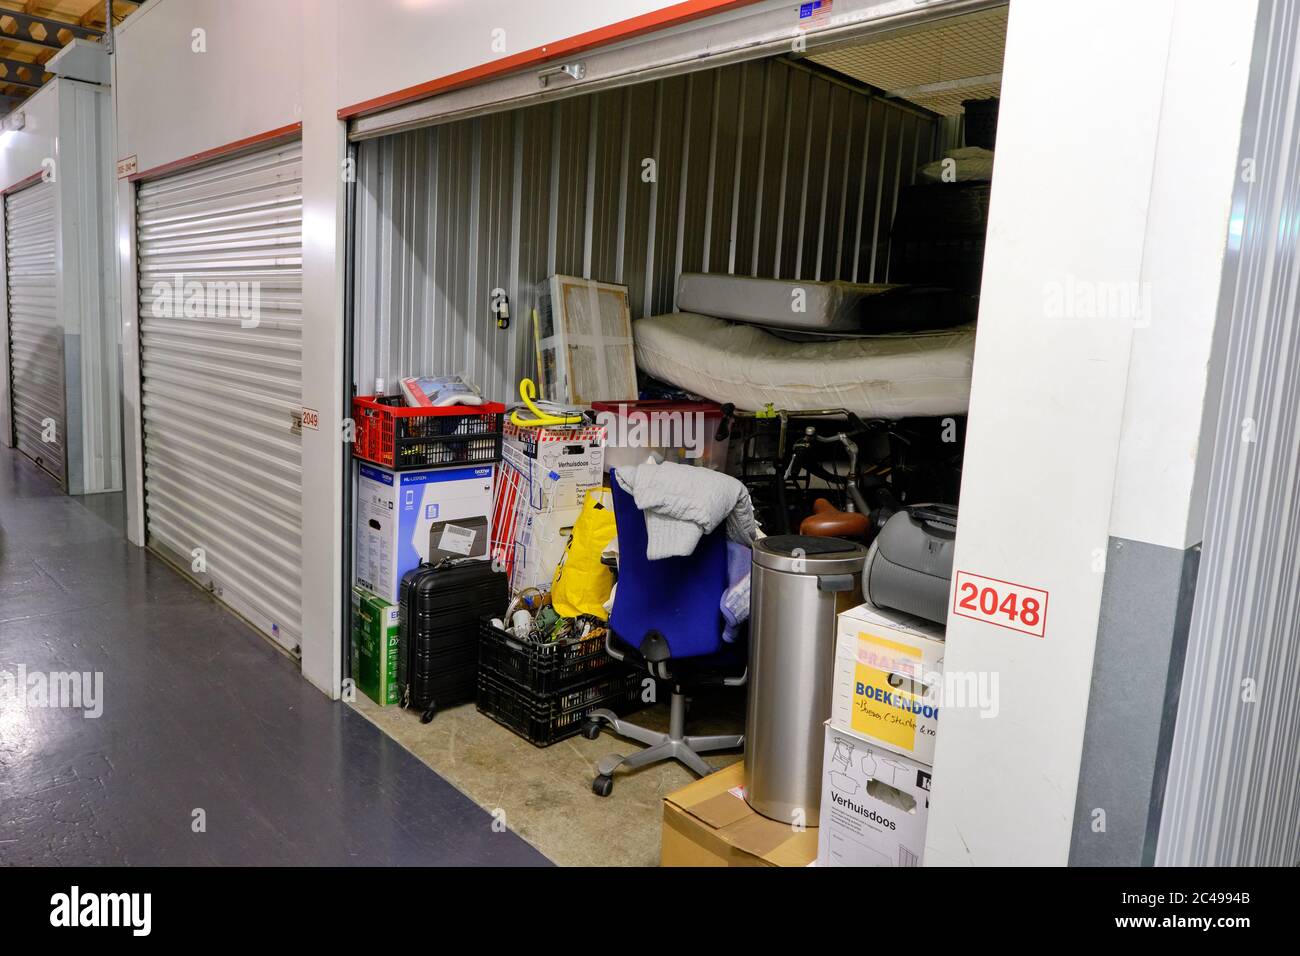 Amersfoort, the Netherlands,June,20,2020:Indoor storage unit with open door and household goods in a self storage facility. Rental Storage Units Stock Photo